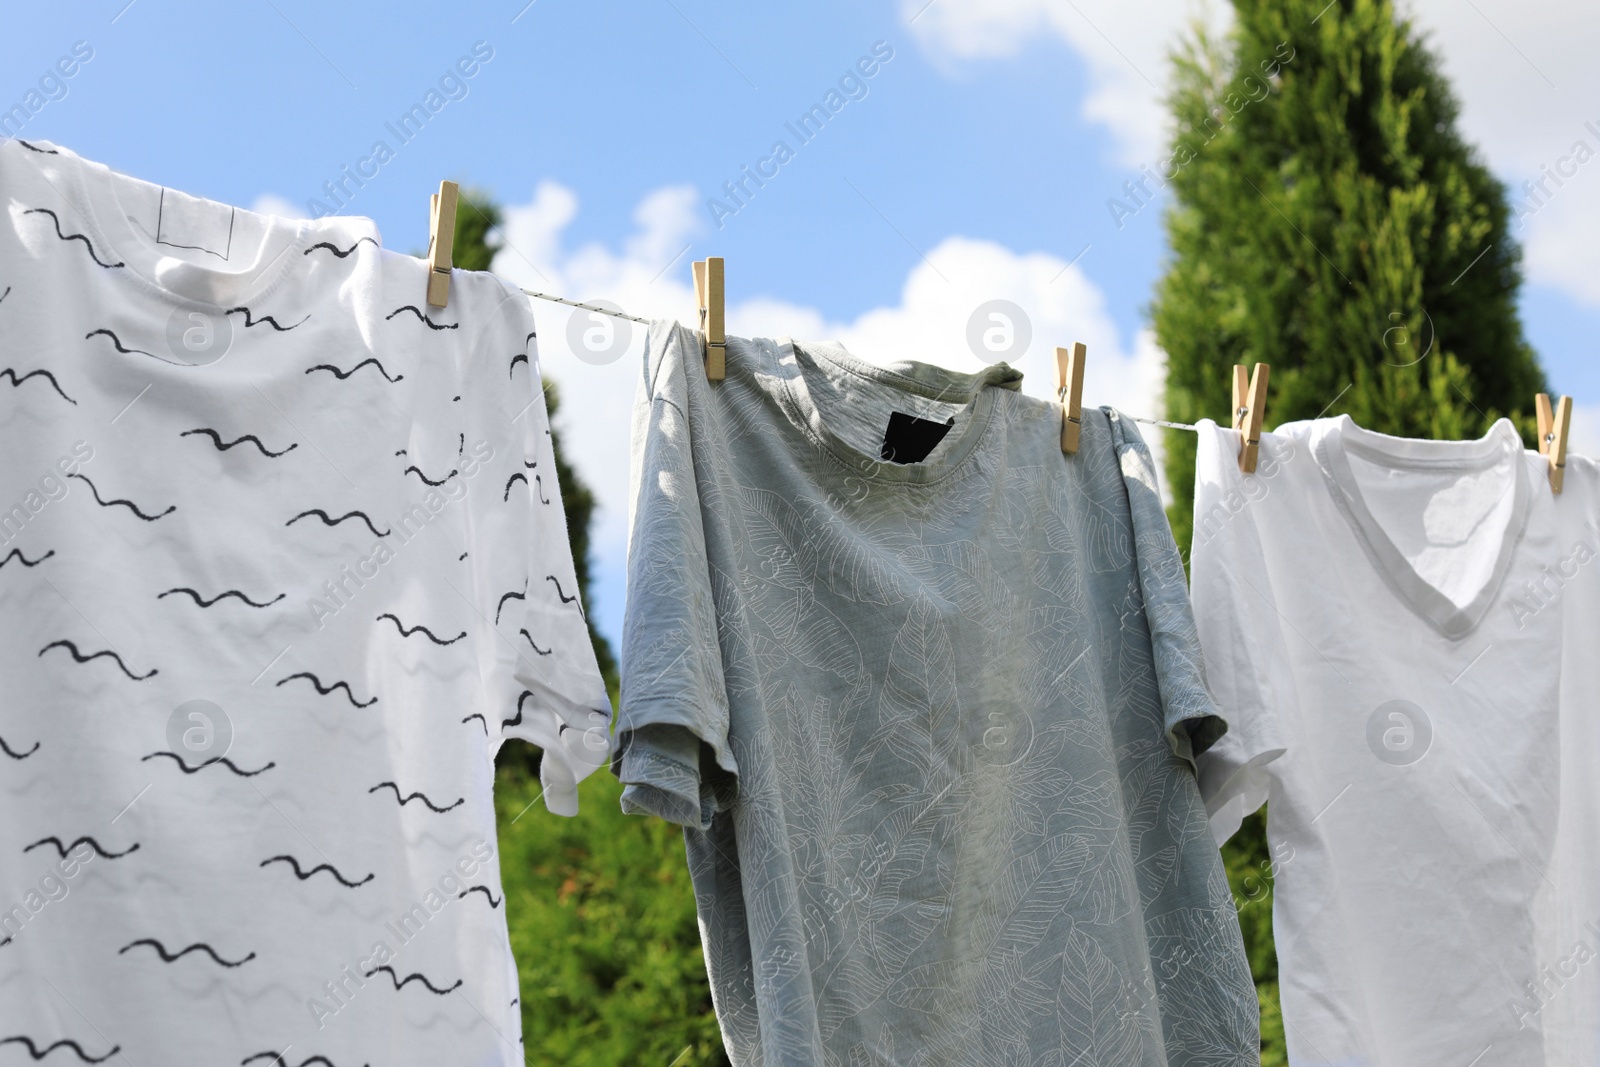 Photo of Washing line with clean clothes outdoors. Drying laundry outside